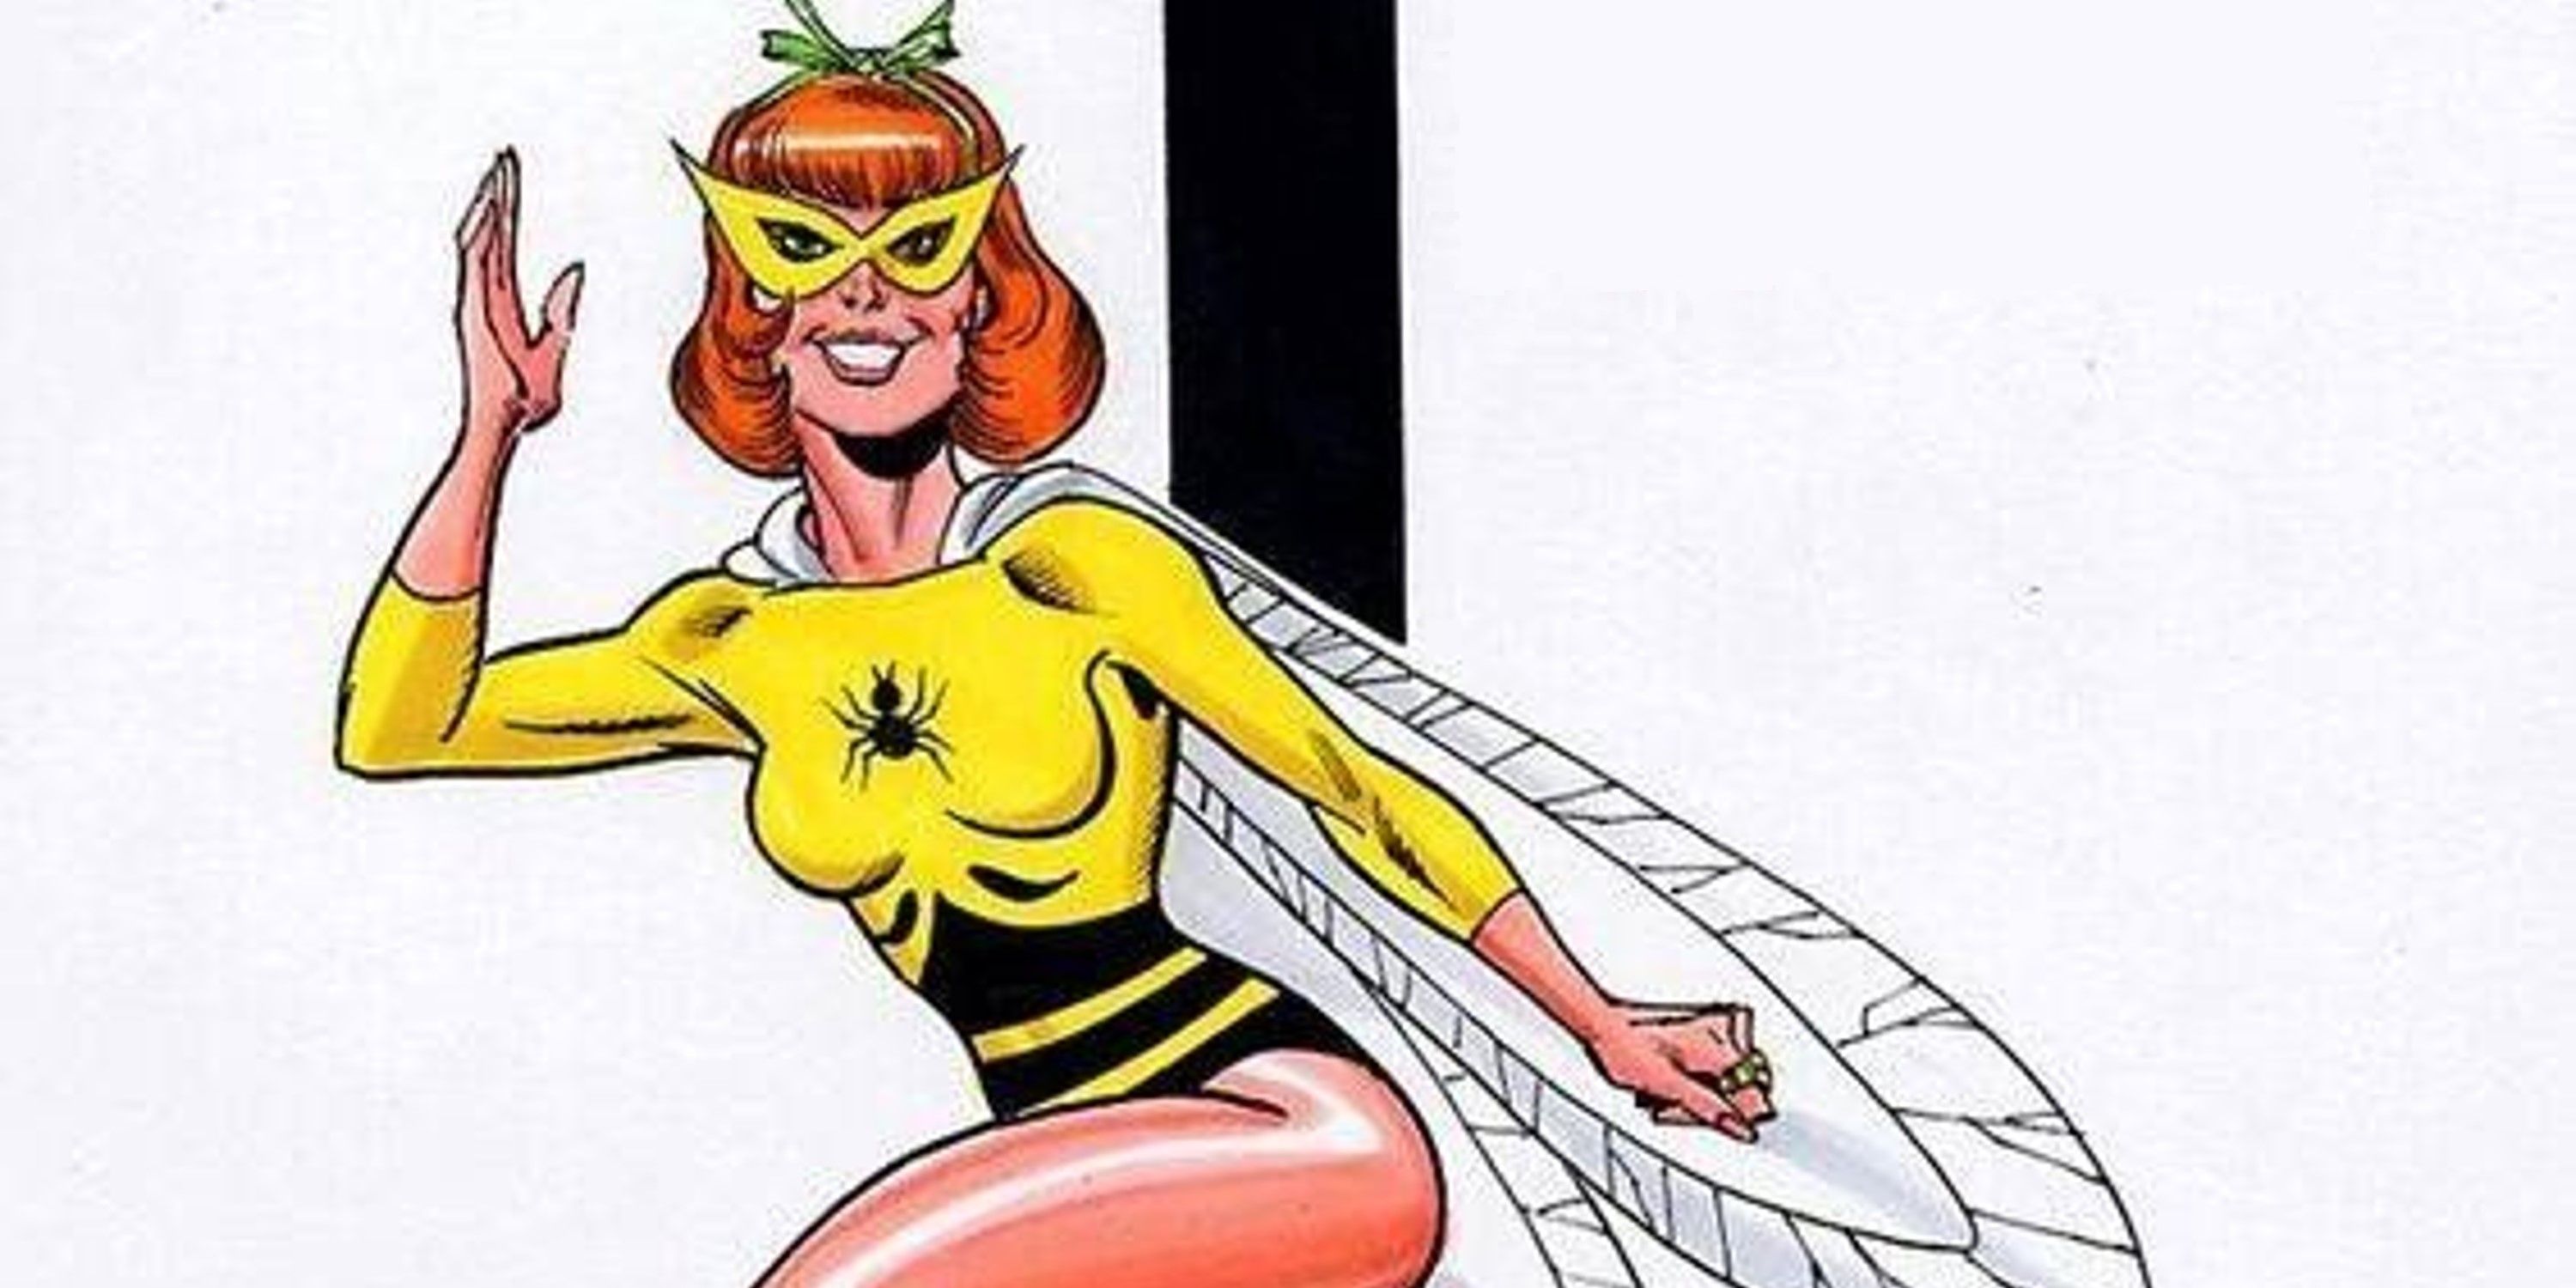 Lana Lang as Insect Queen in DC Comics